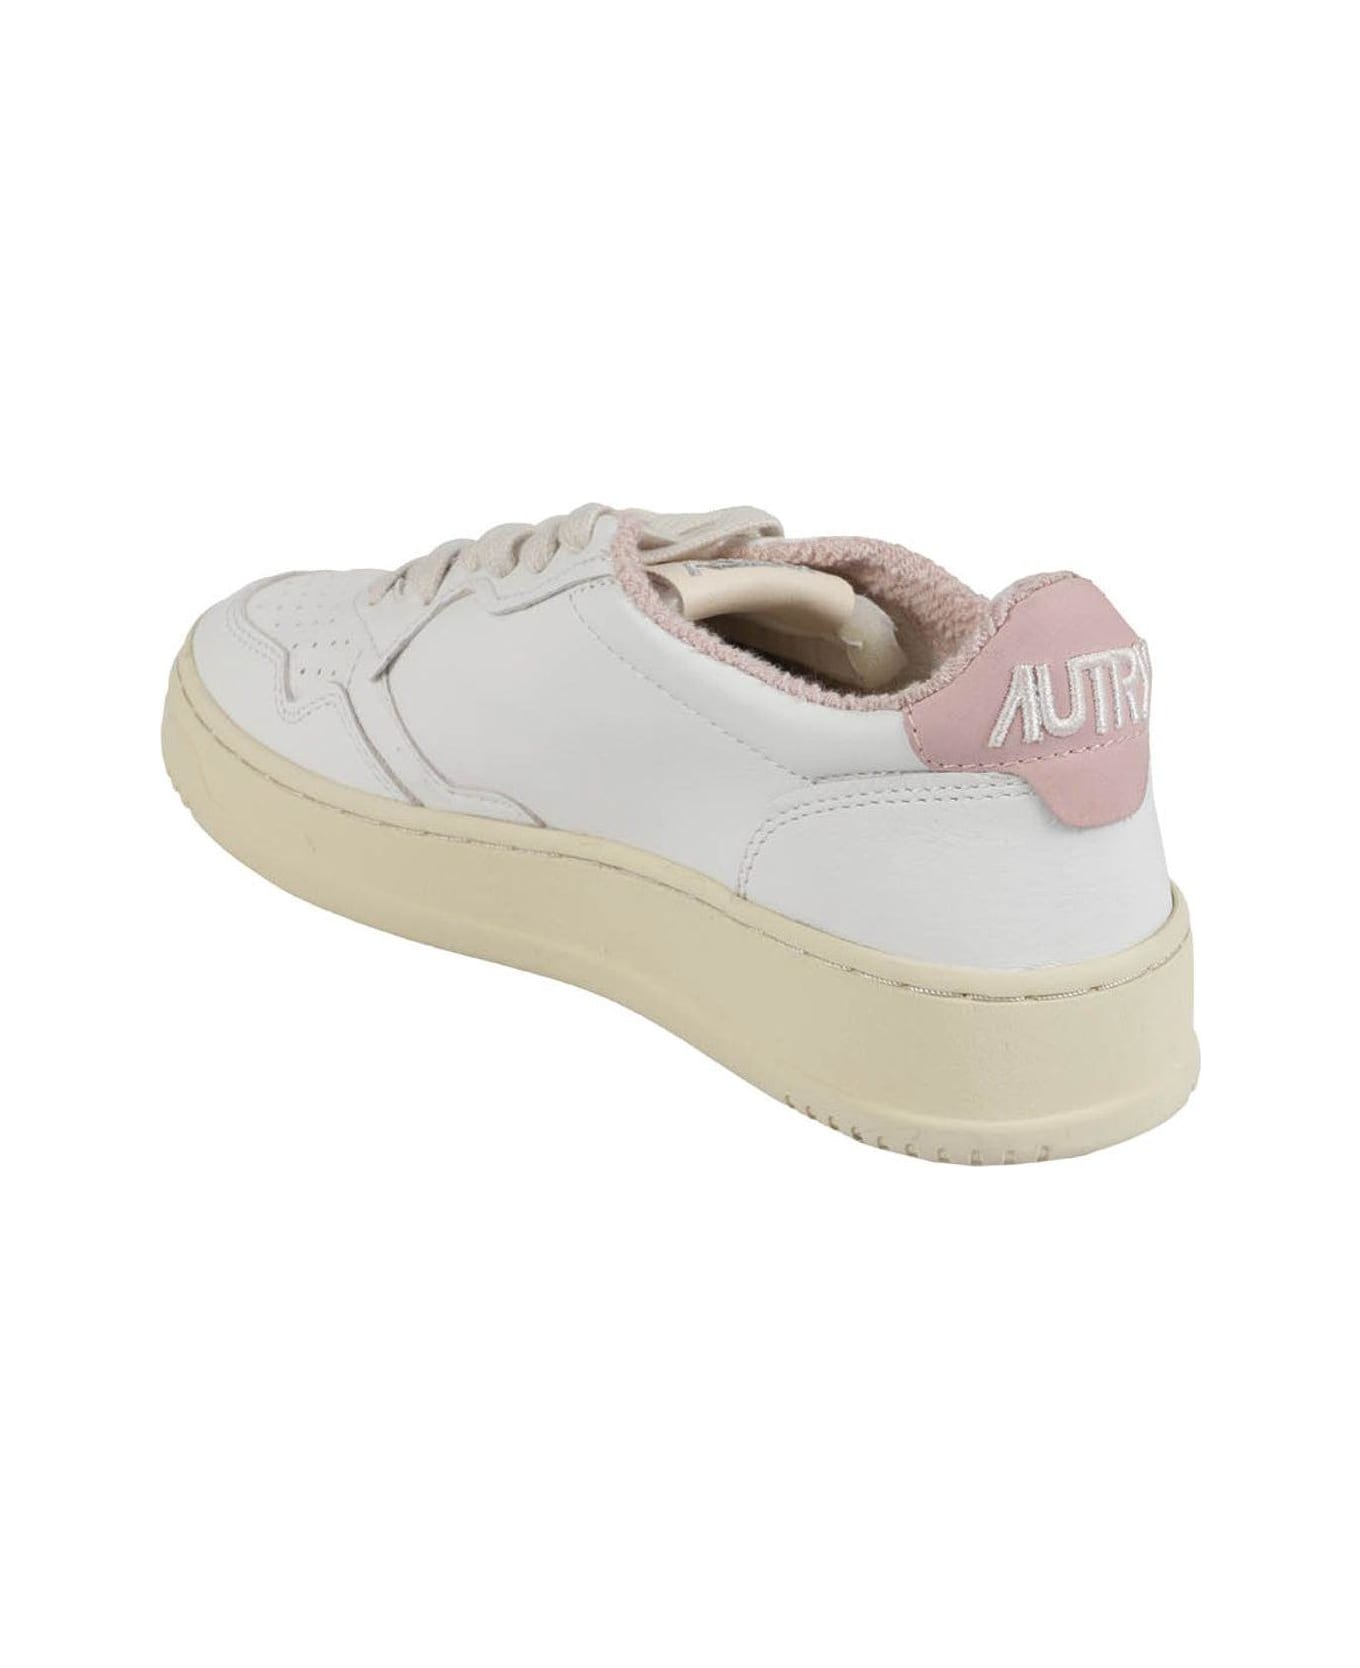 Autry Medalist Low Wom Sneakers - White Powder